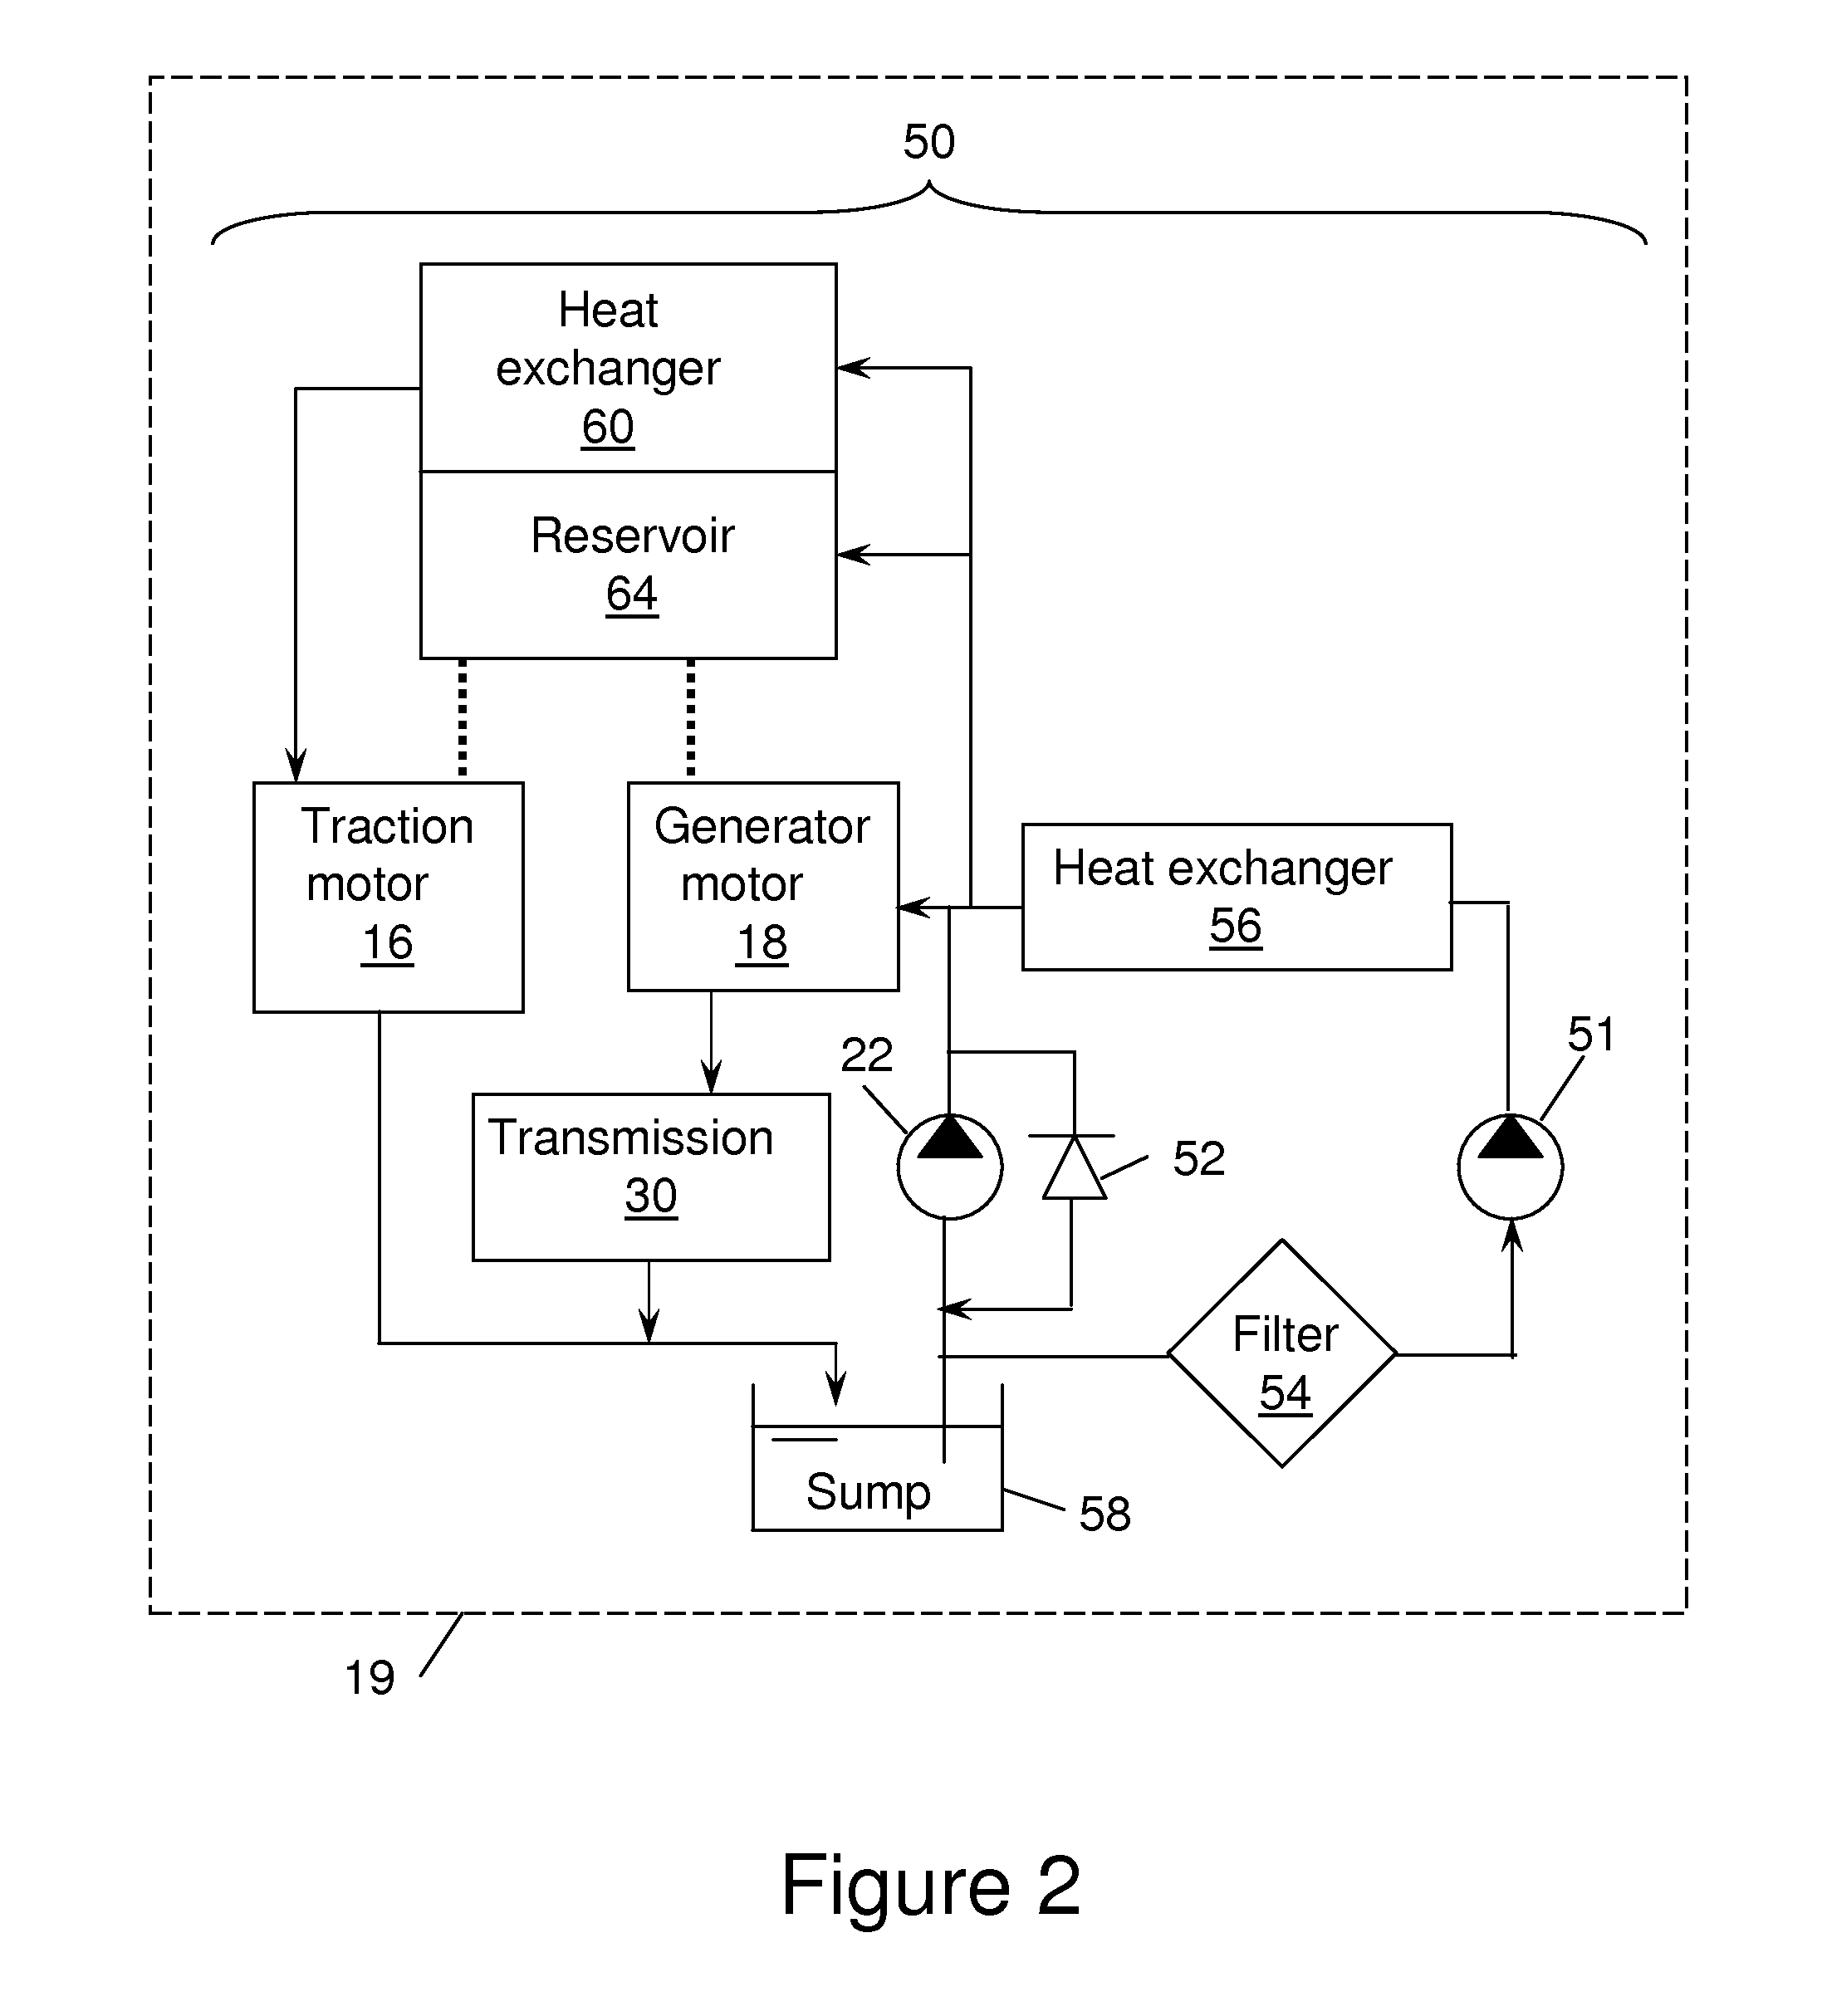 System and method to provide lubrication for a plug-in hybrid